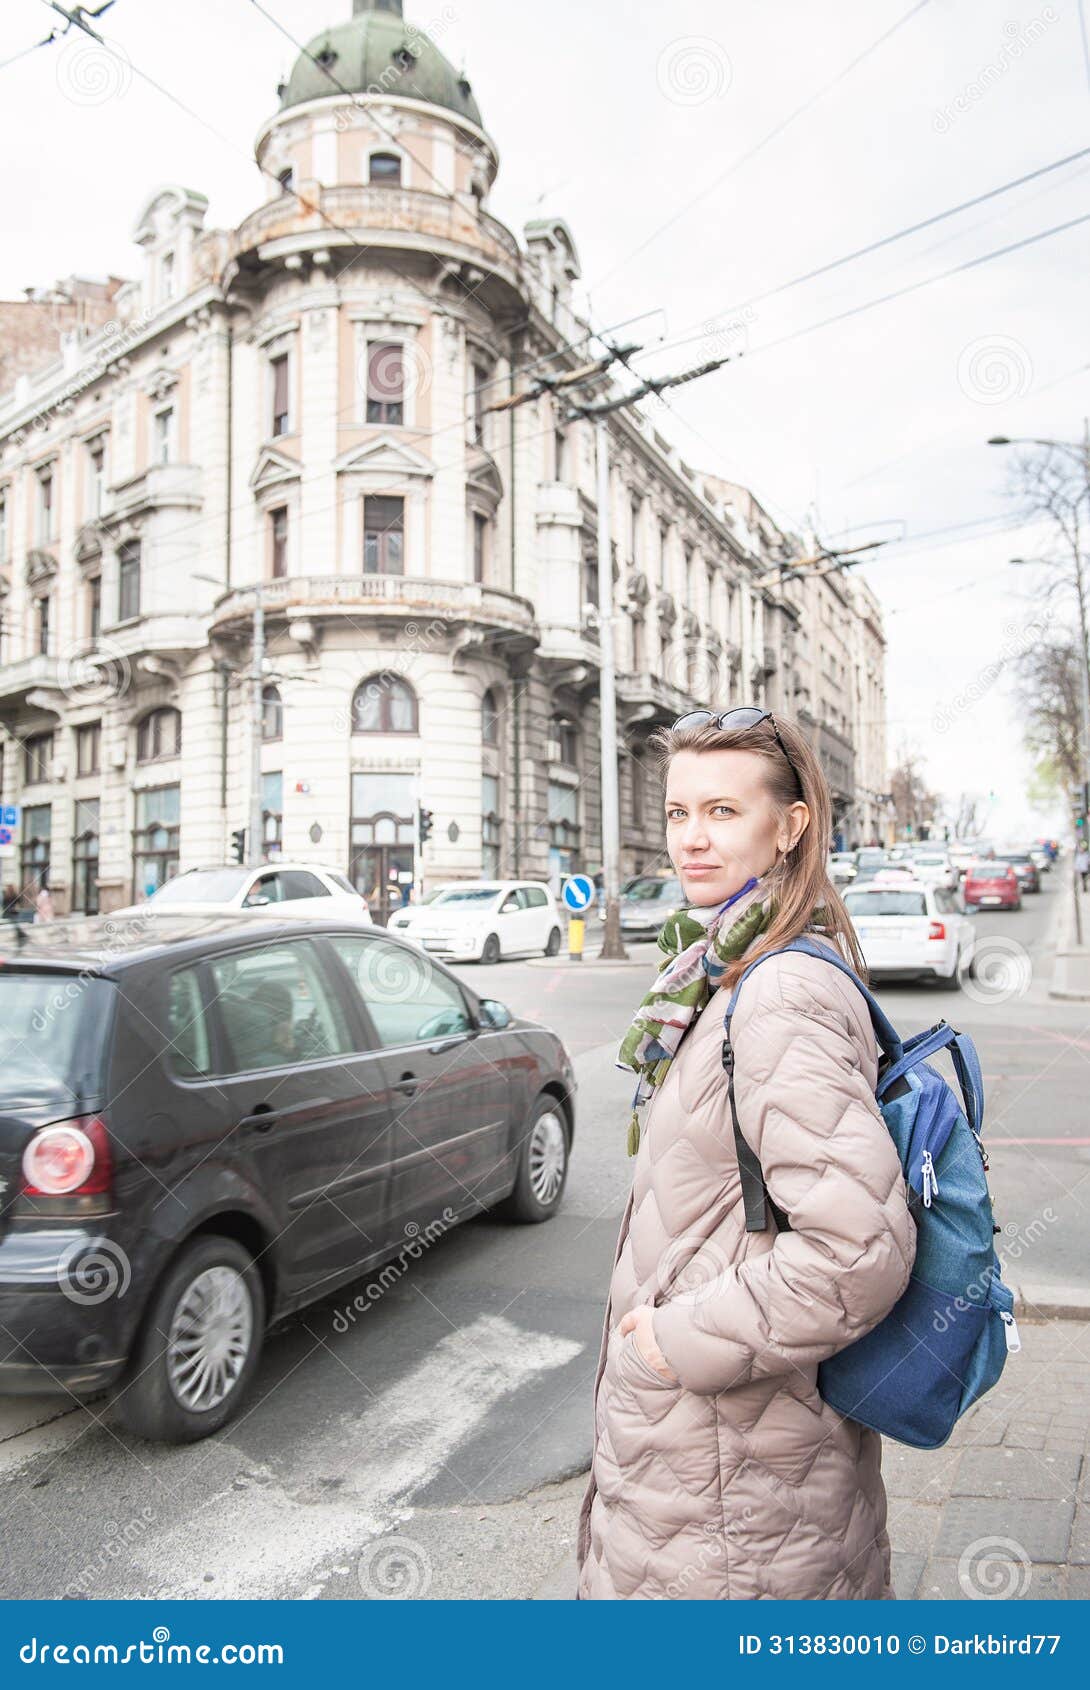 beautiful woman with bagpack and sunglasses standing on the street in the belgrade city, serbia